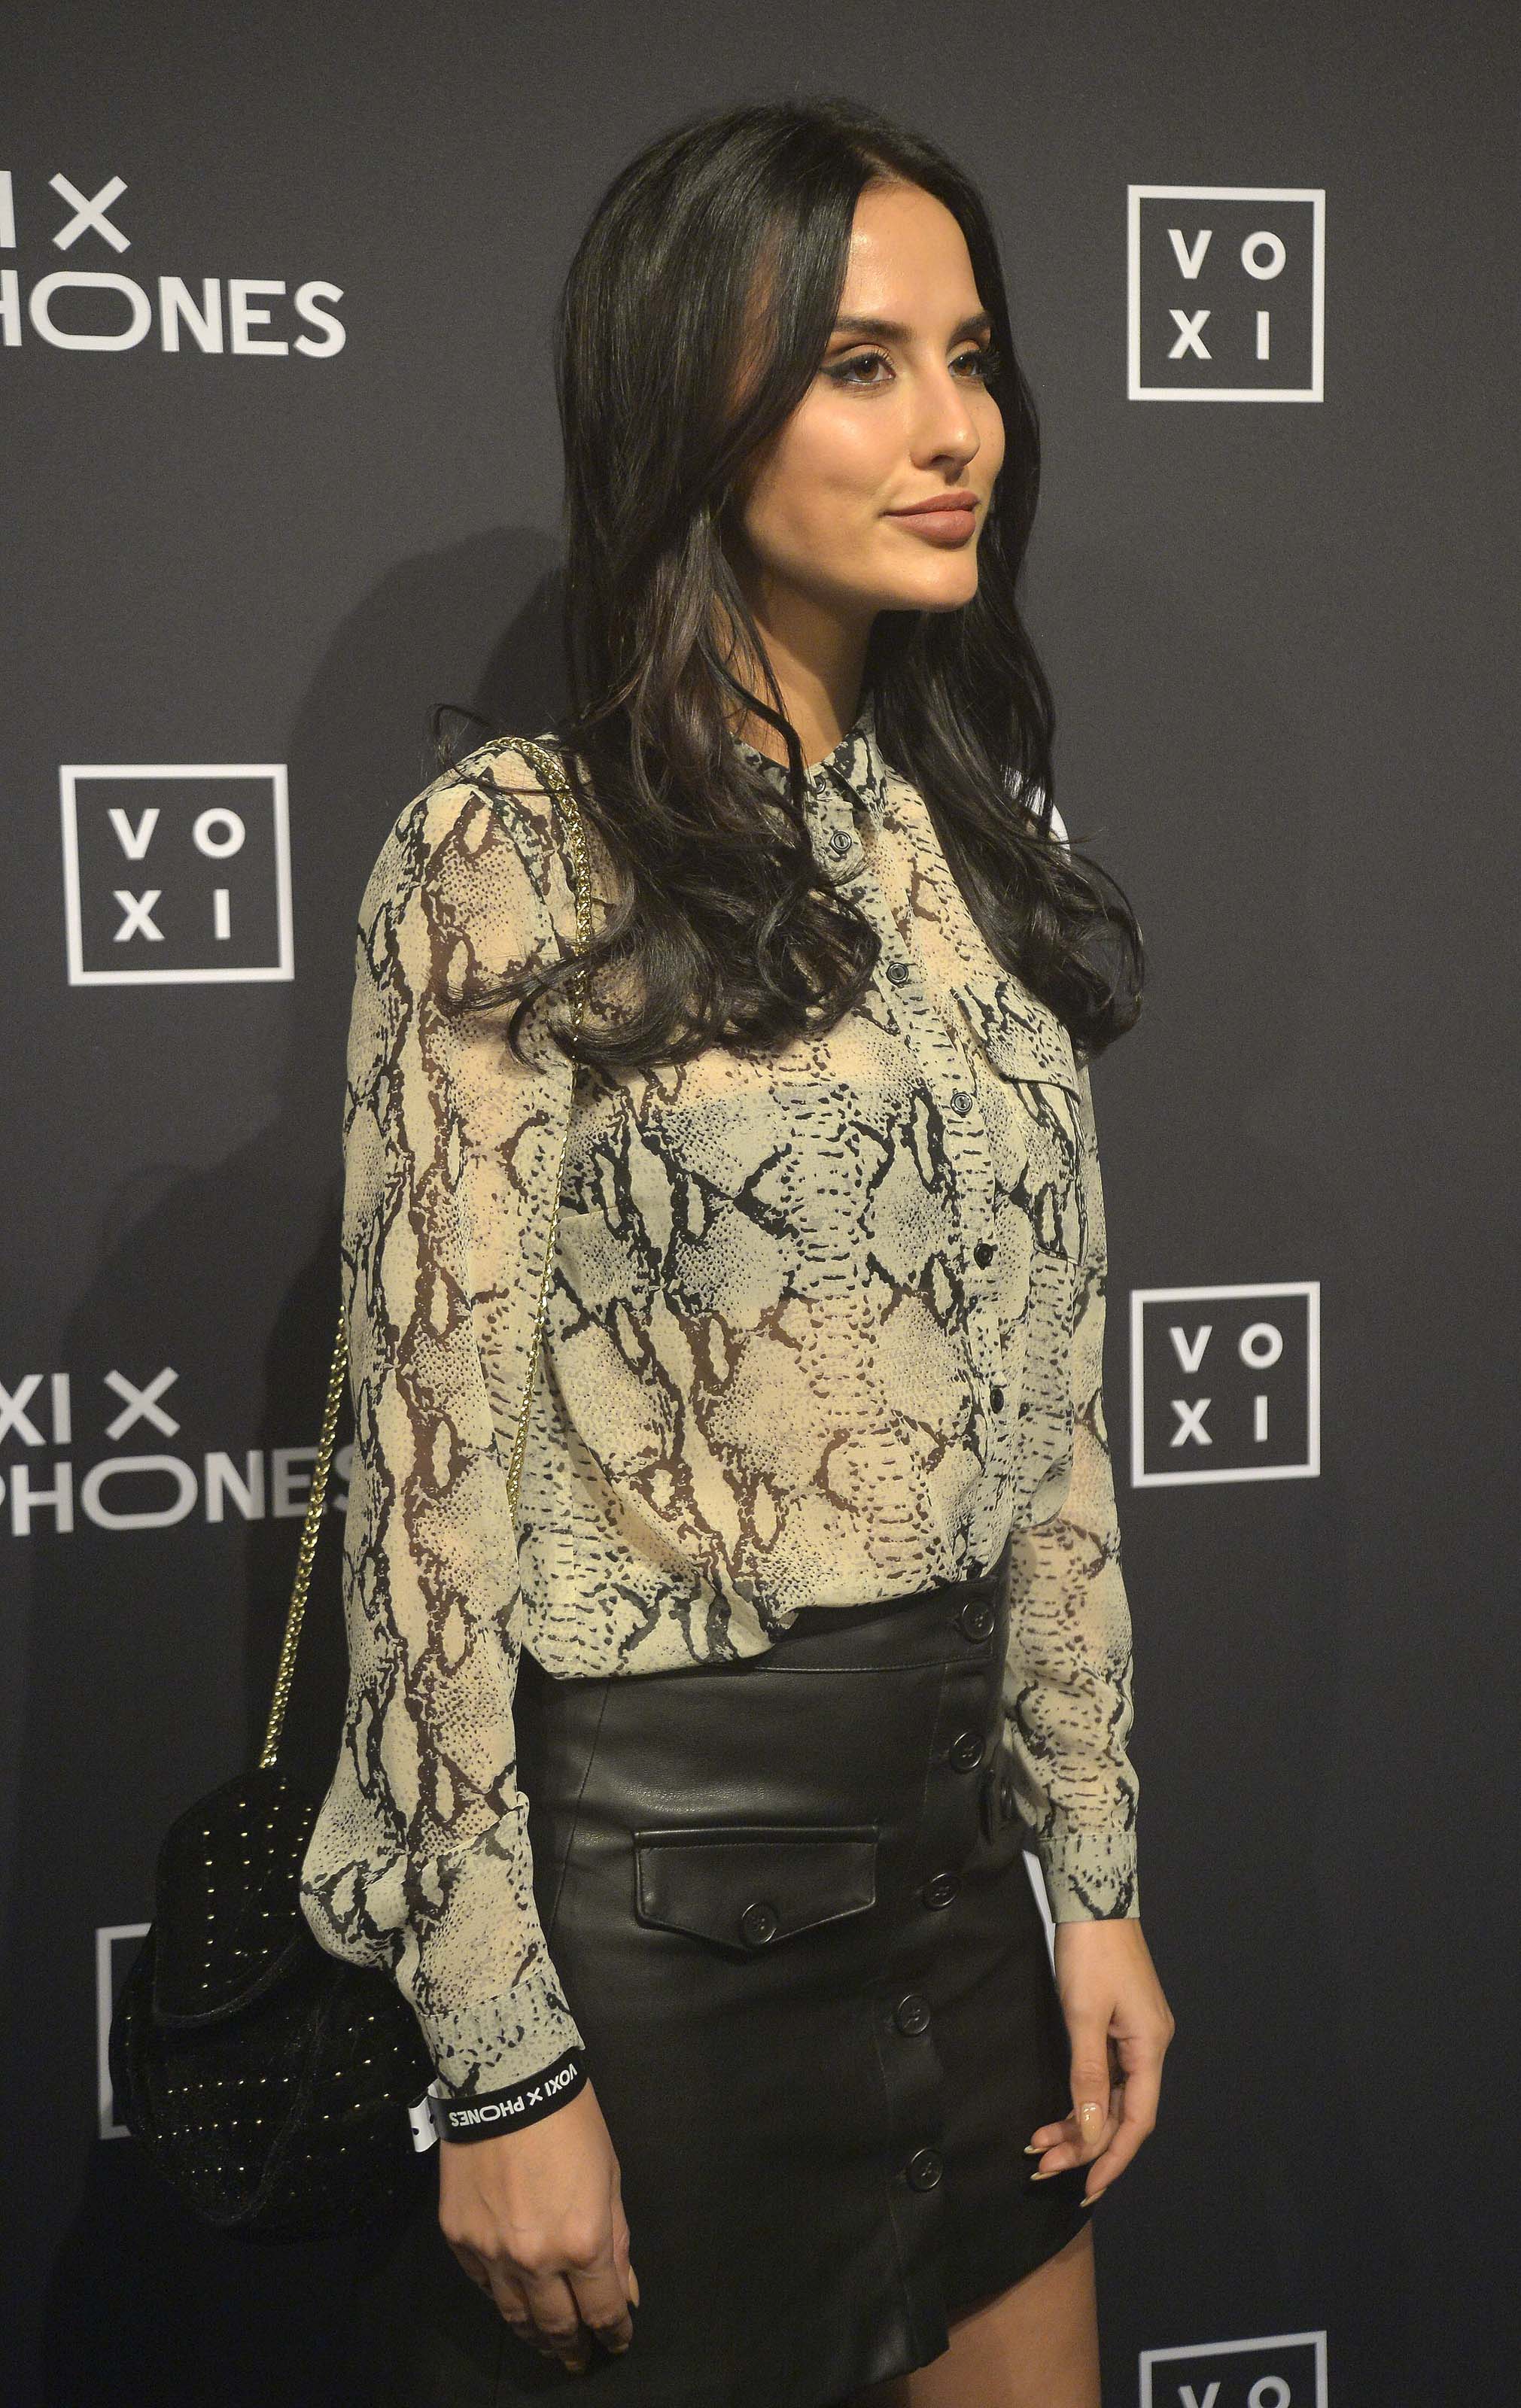 Lucy Watson attends VOXI House Party